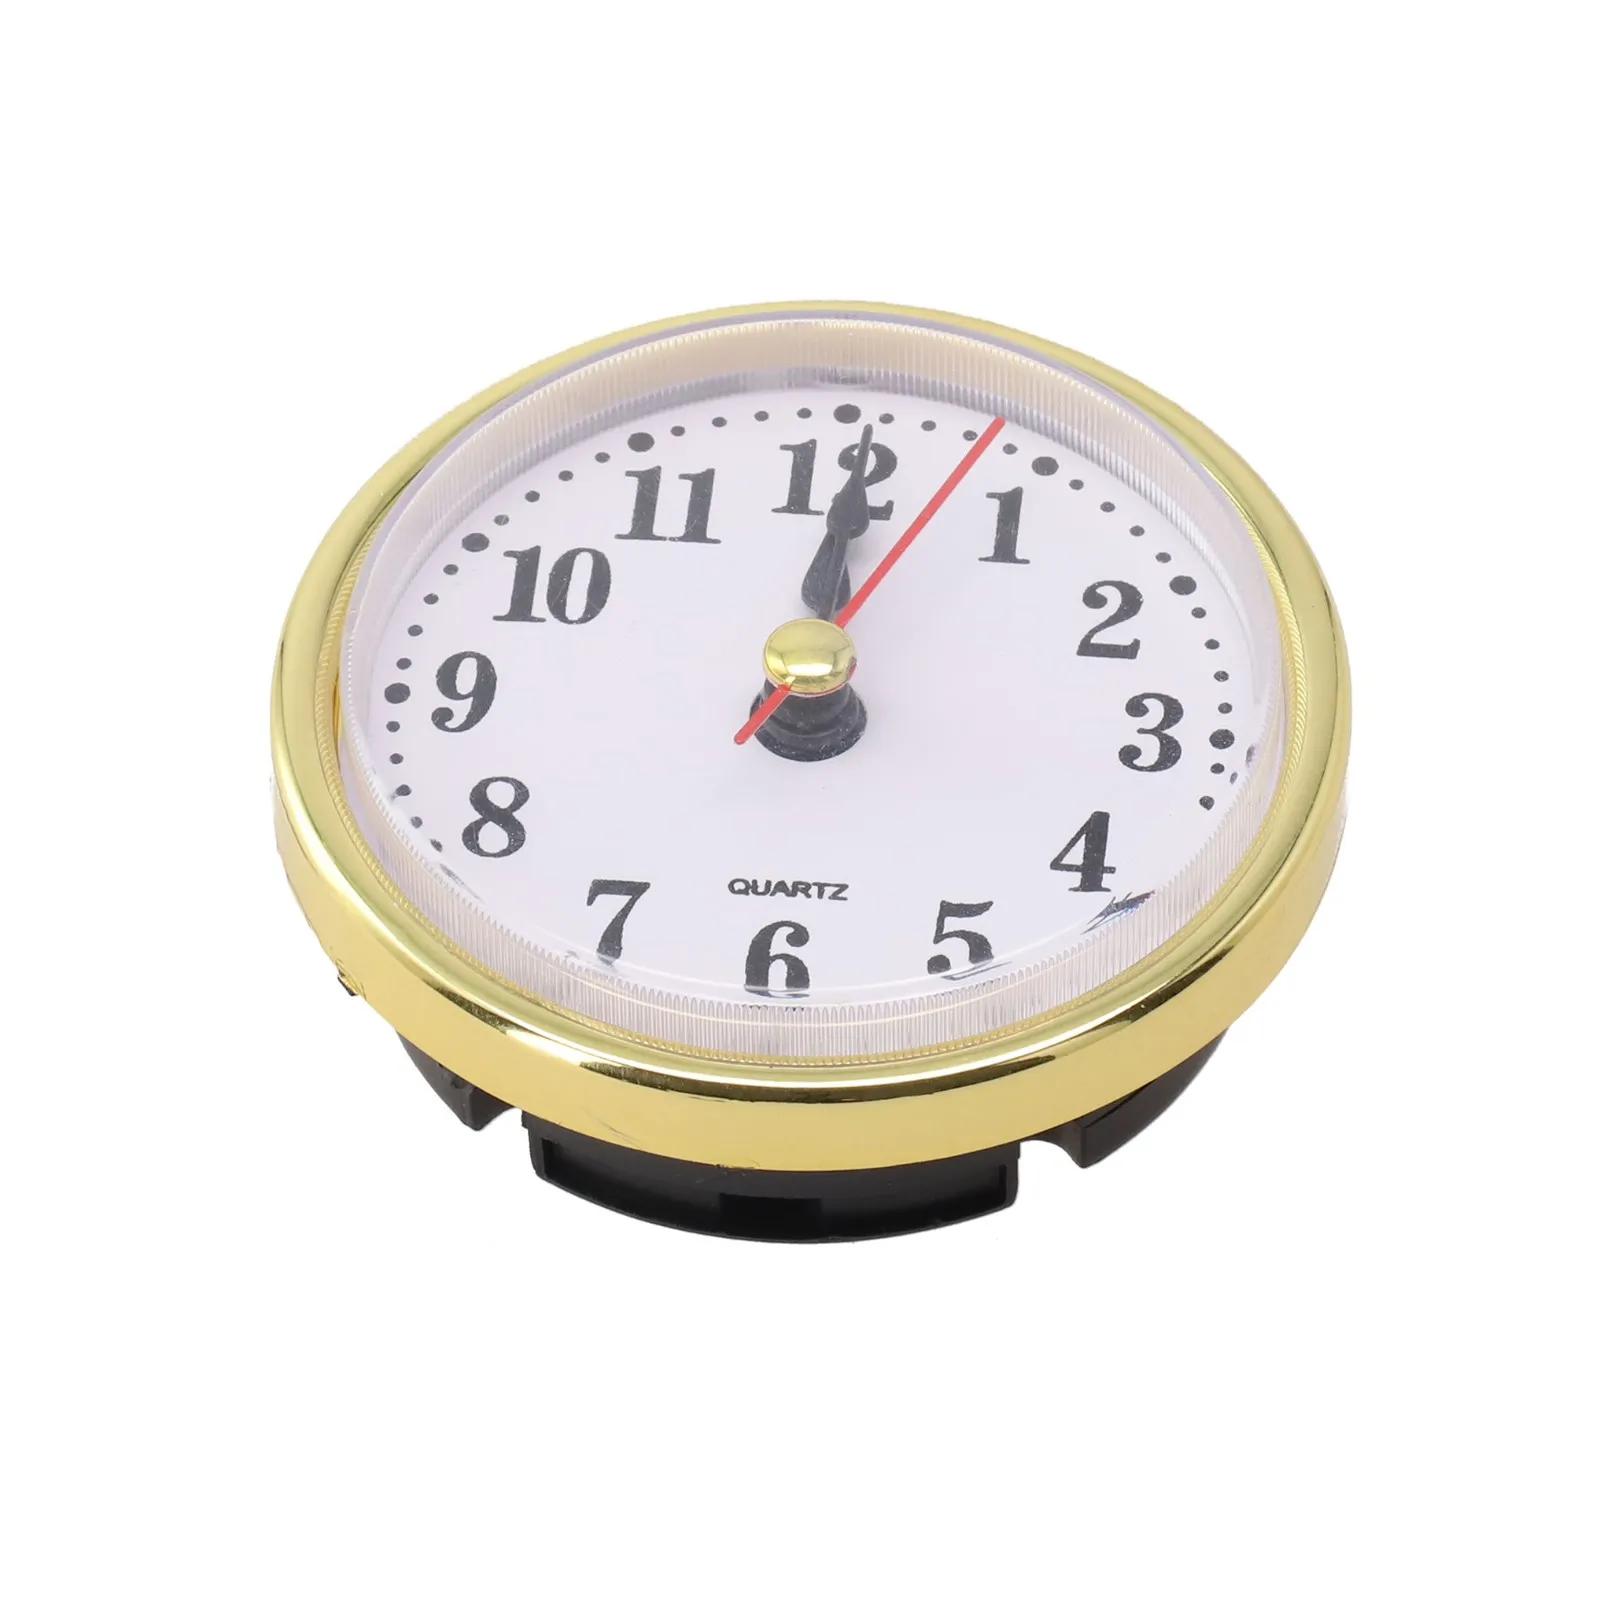 

Replace Your Broken Clock with 110MM Quartz Clock Insert, Gold Colored Trim, Silent Movement, Easy Installation